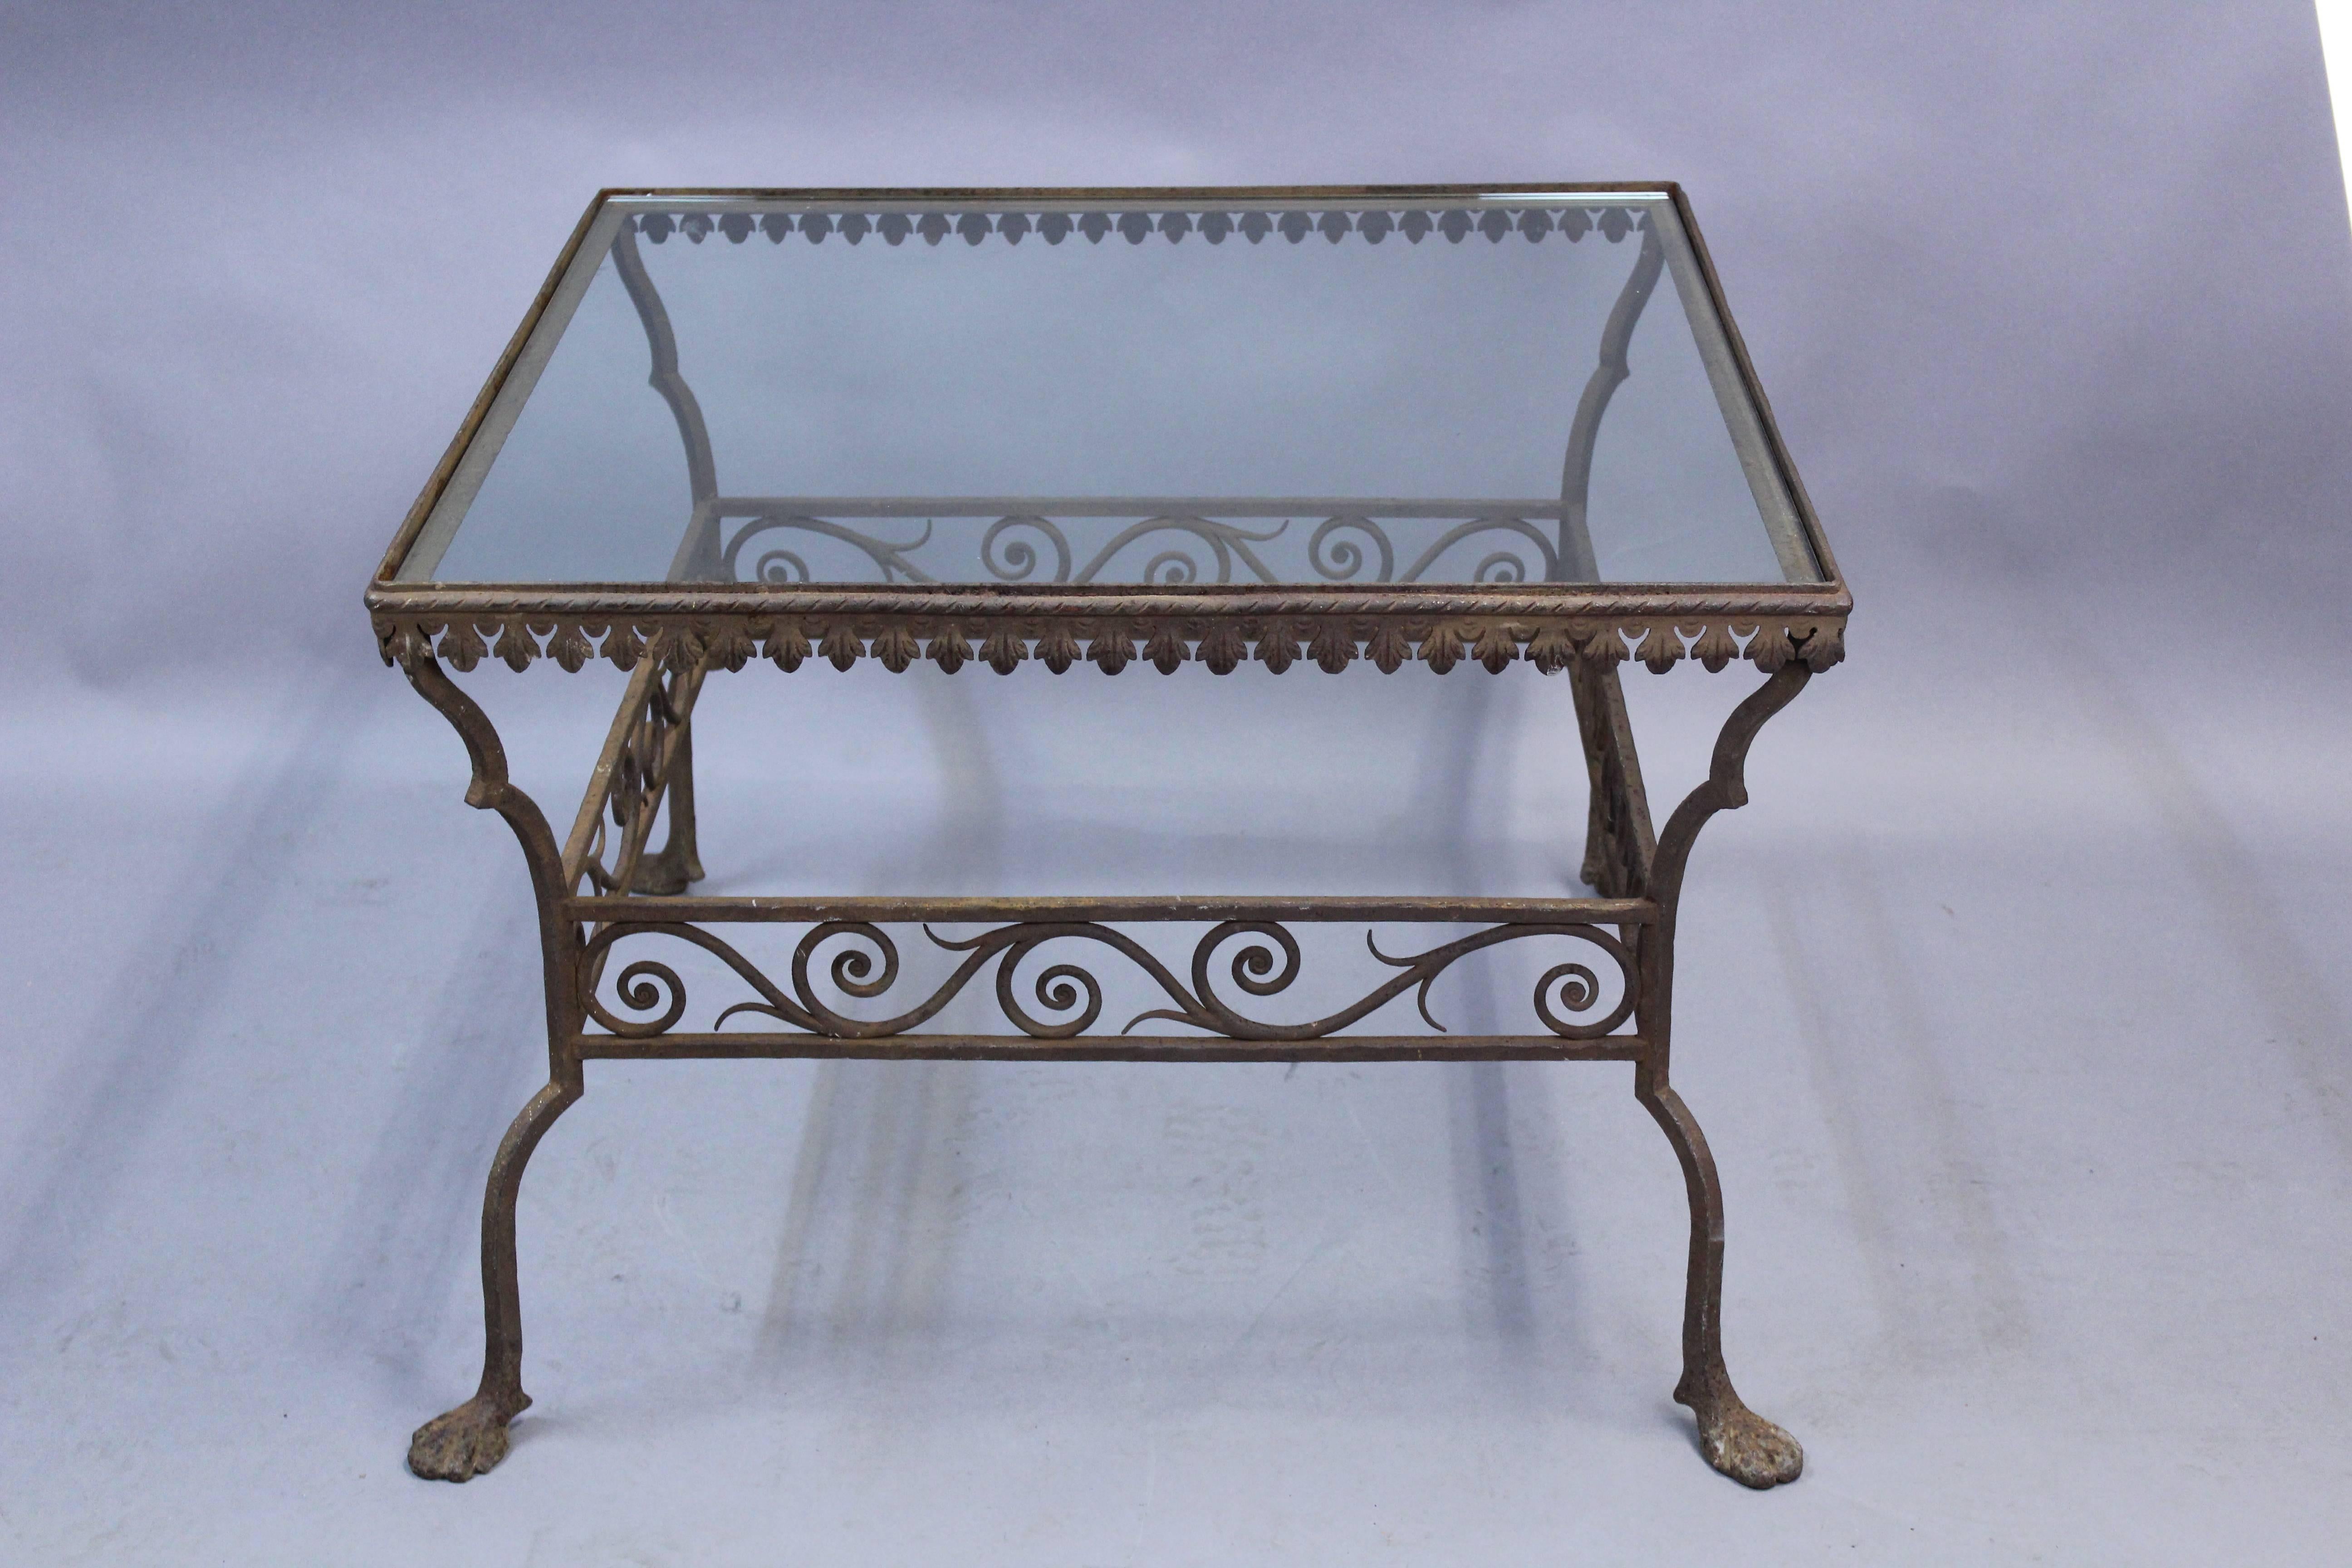 American 1920s Iron Coffee Table with Beautiful Scroll Details